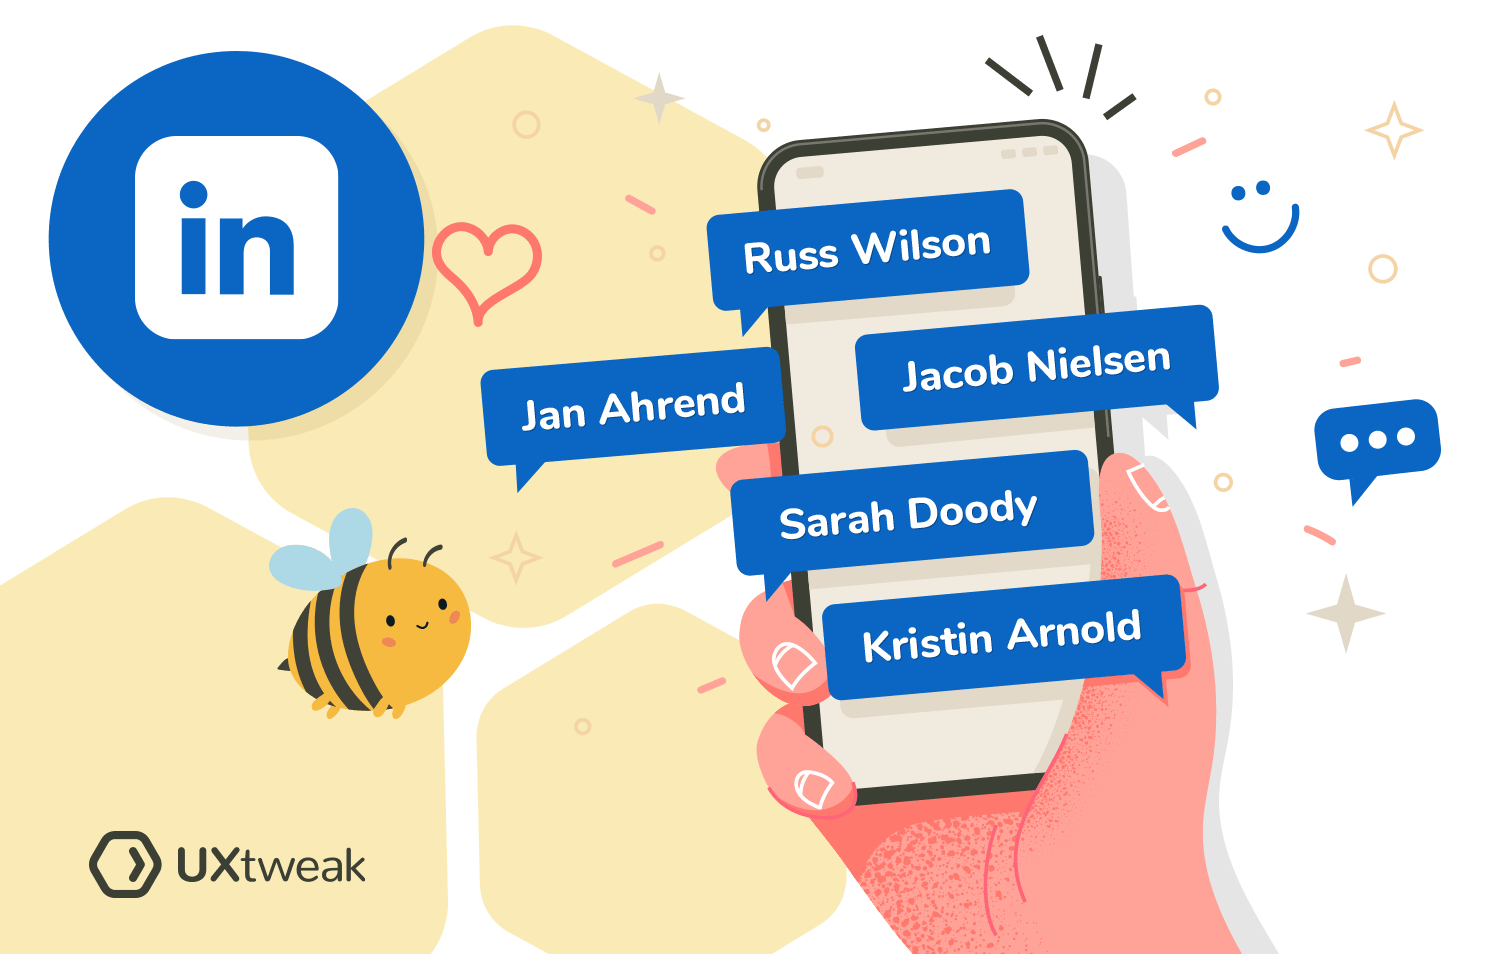 Top UX influencers from LinkedIn